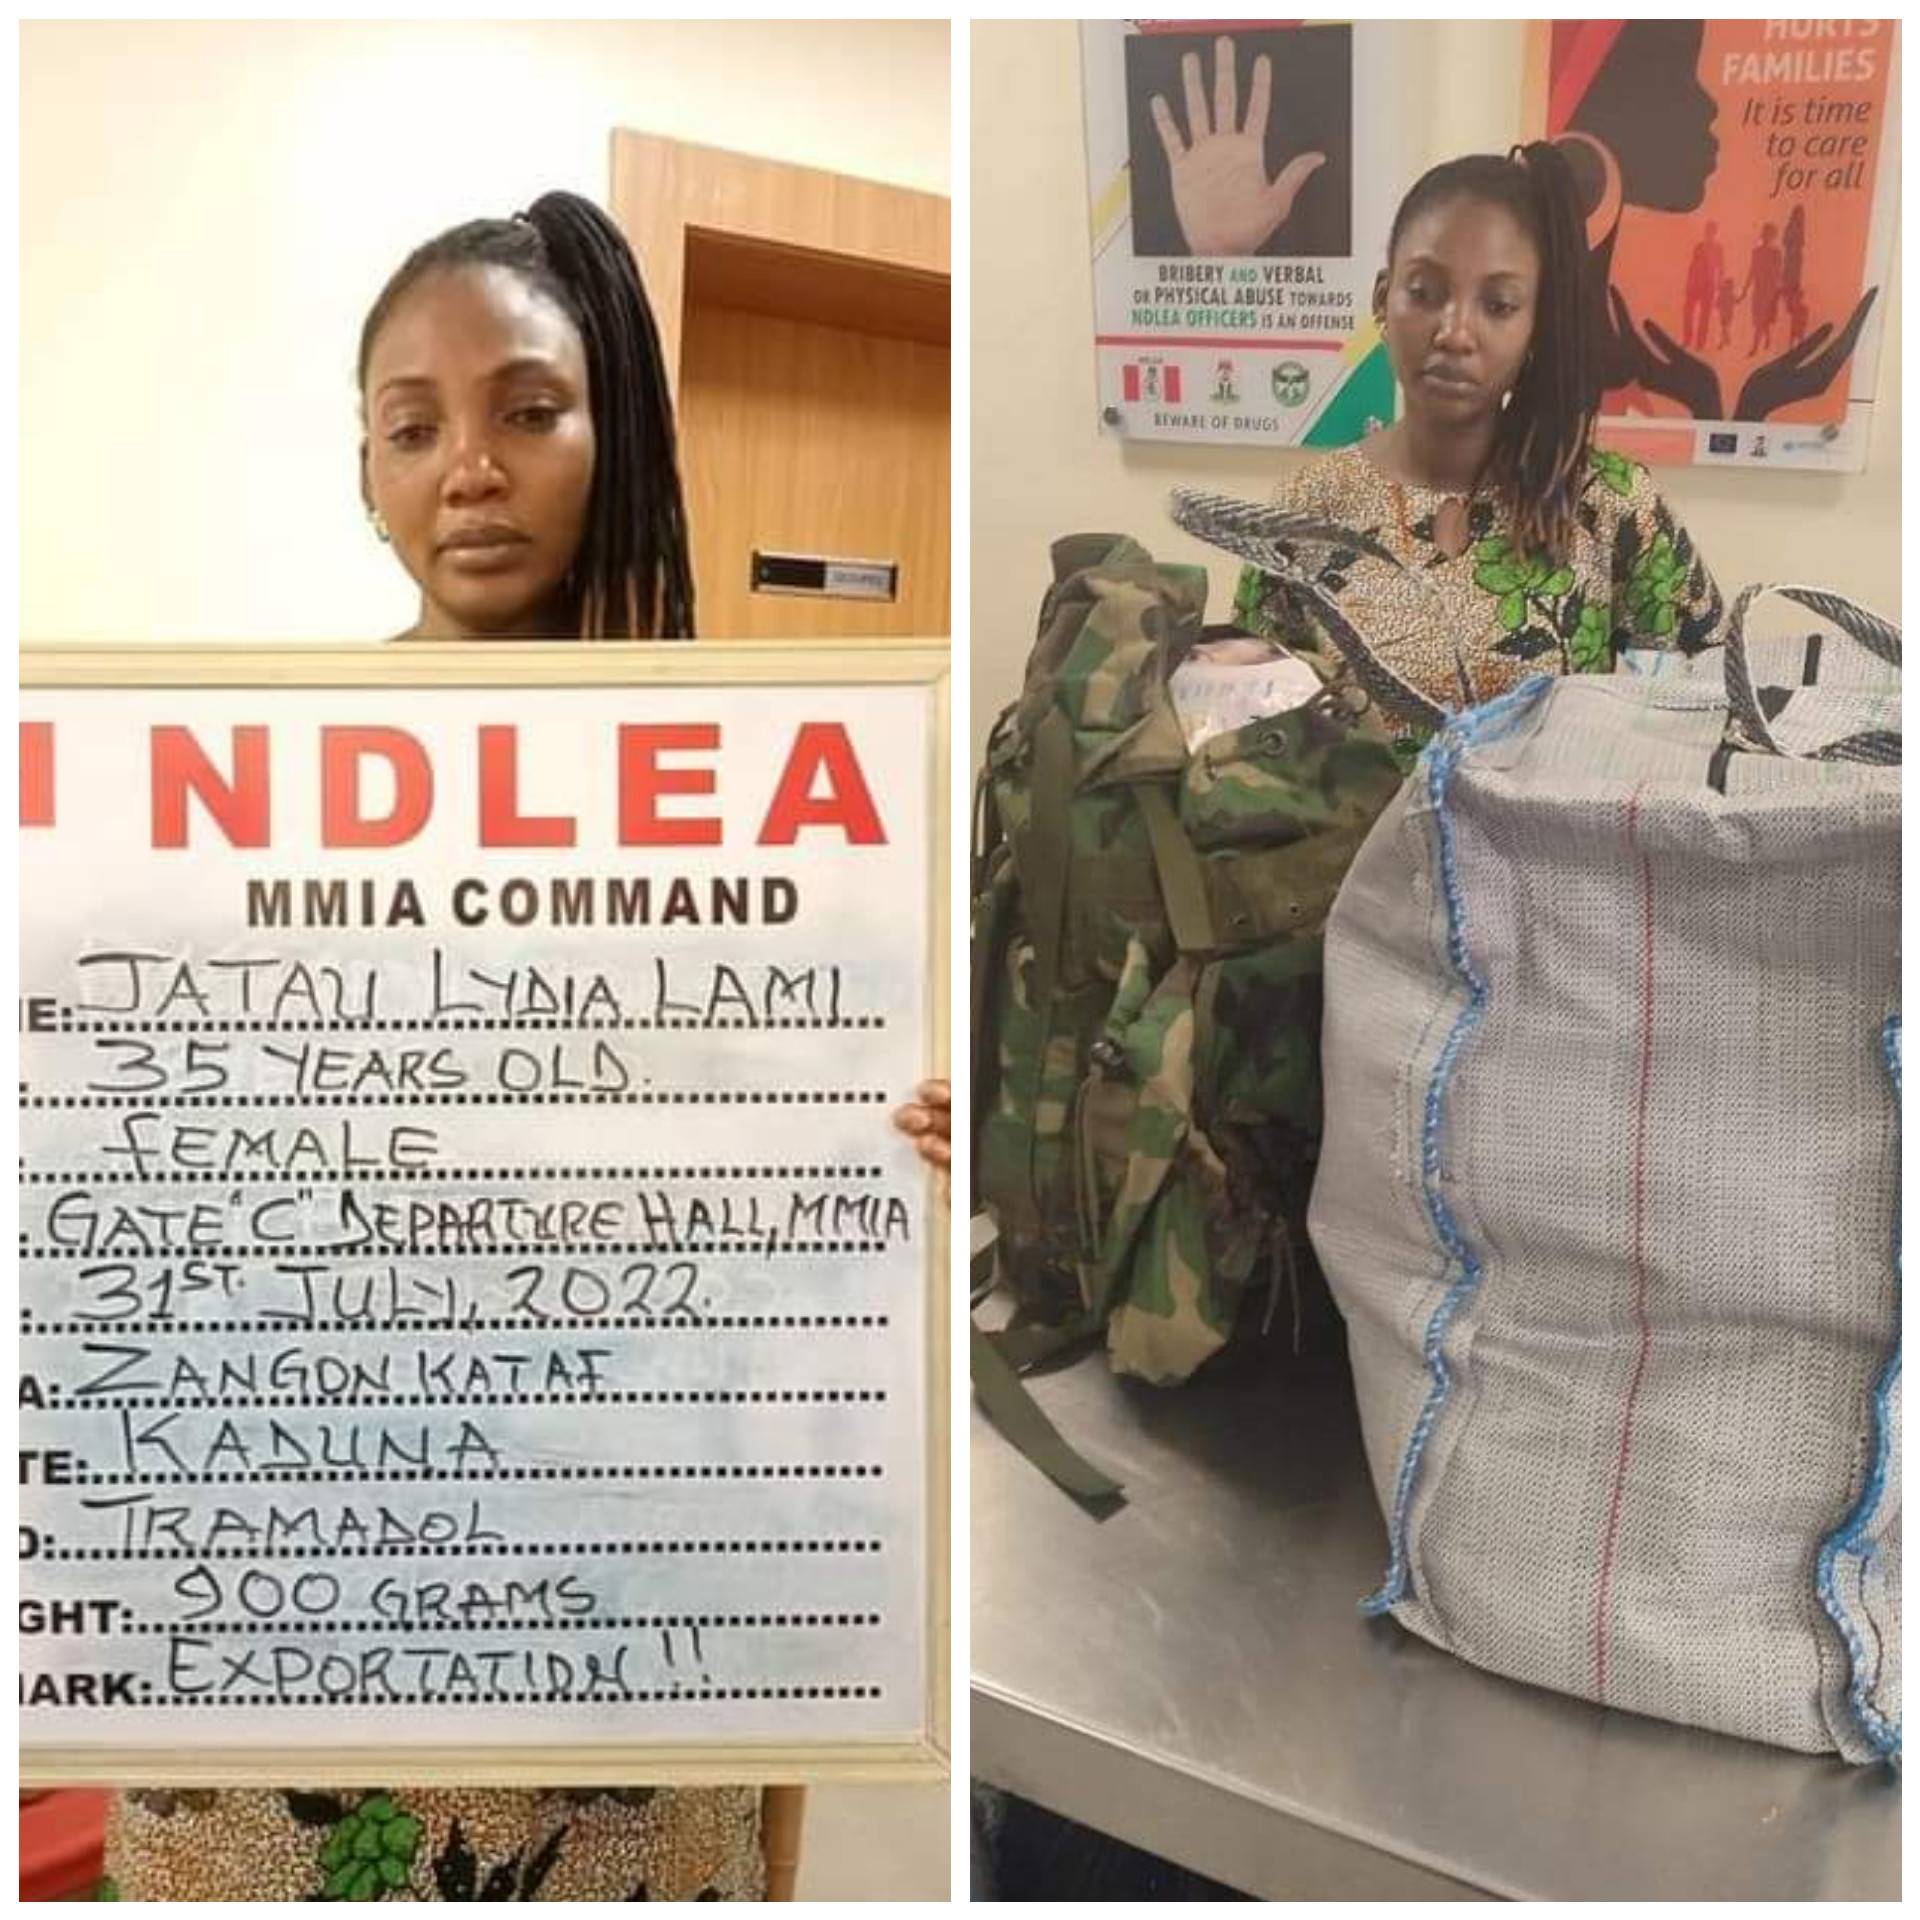 I wanted to raise N5m ransom to free my mother from bandits - Kaduna woman arrested with drugs by NDLEA